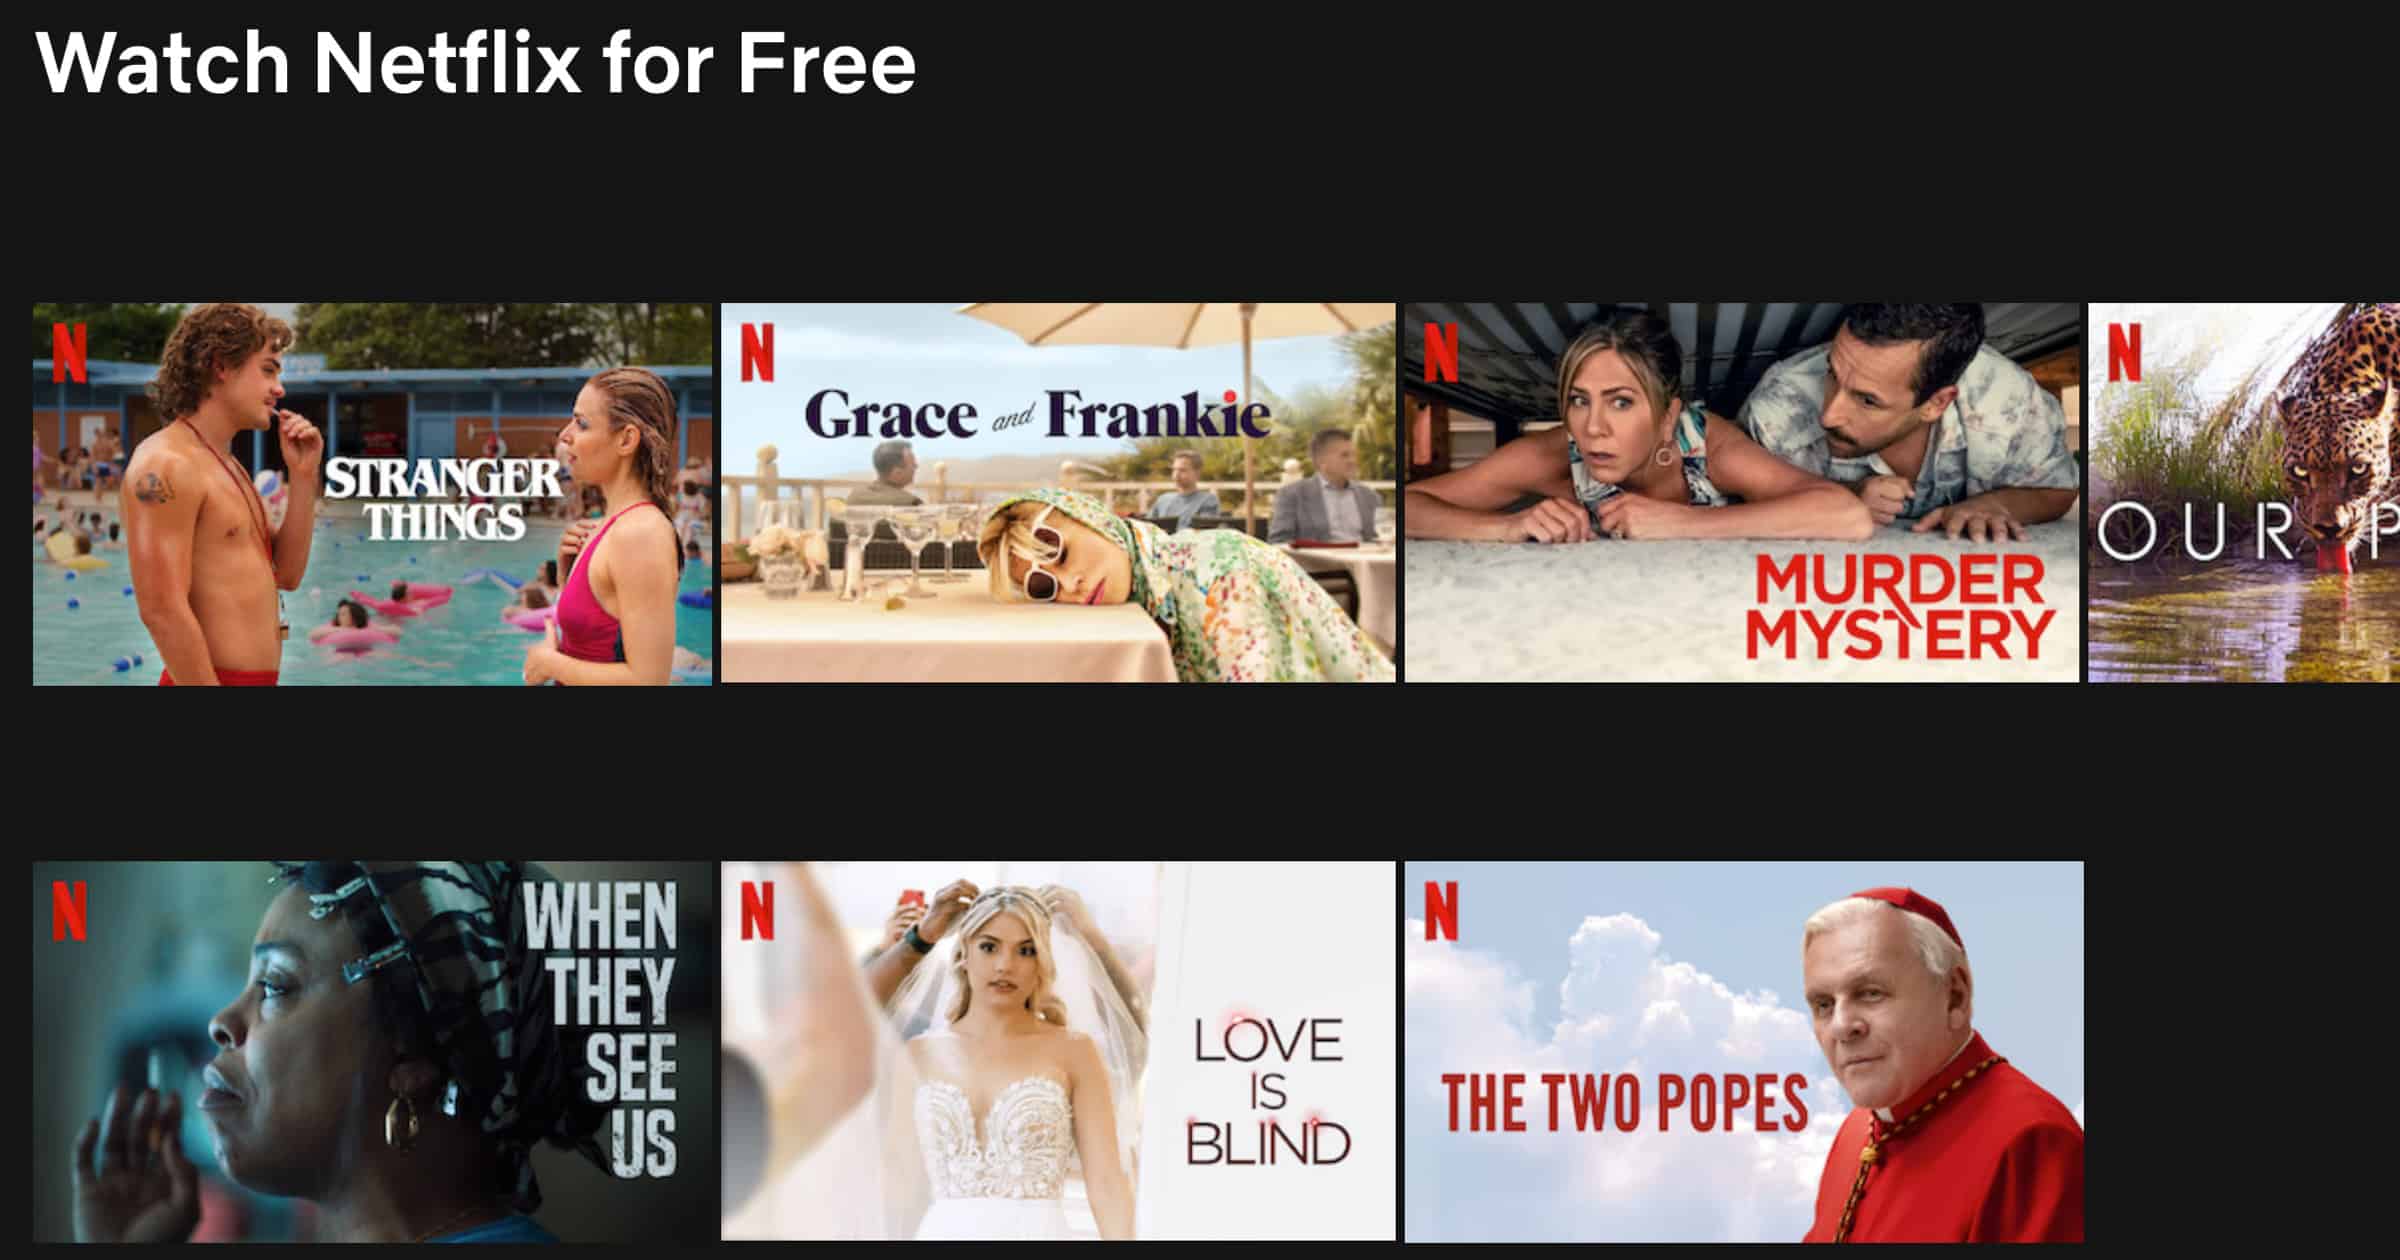 Netflix Offering Original Movies and Shows For Free